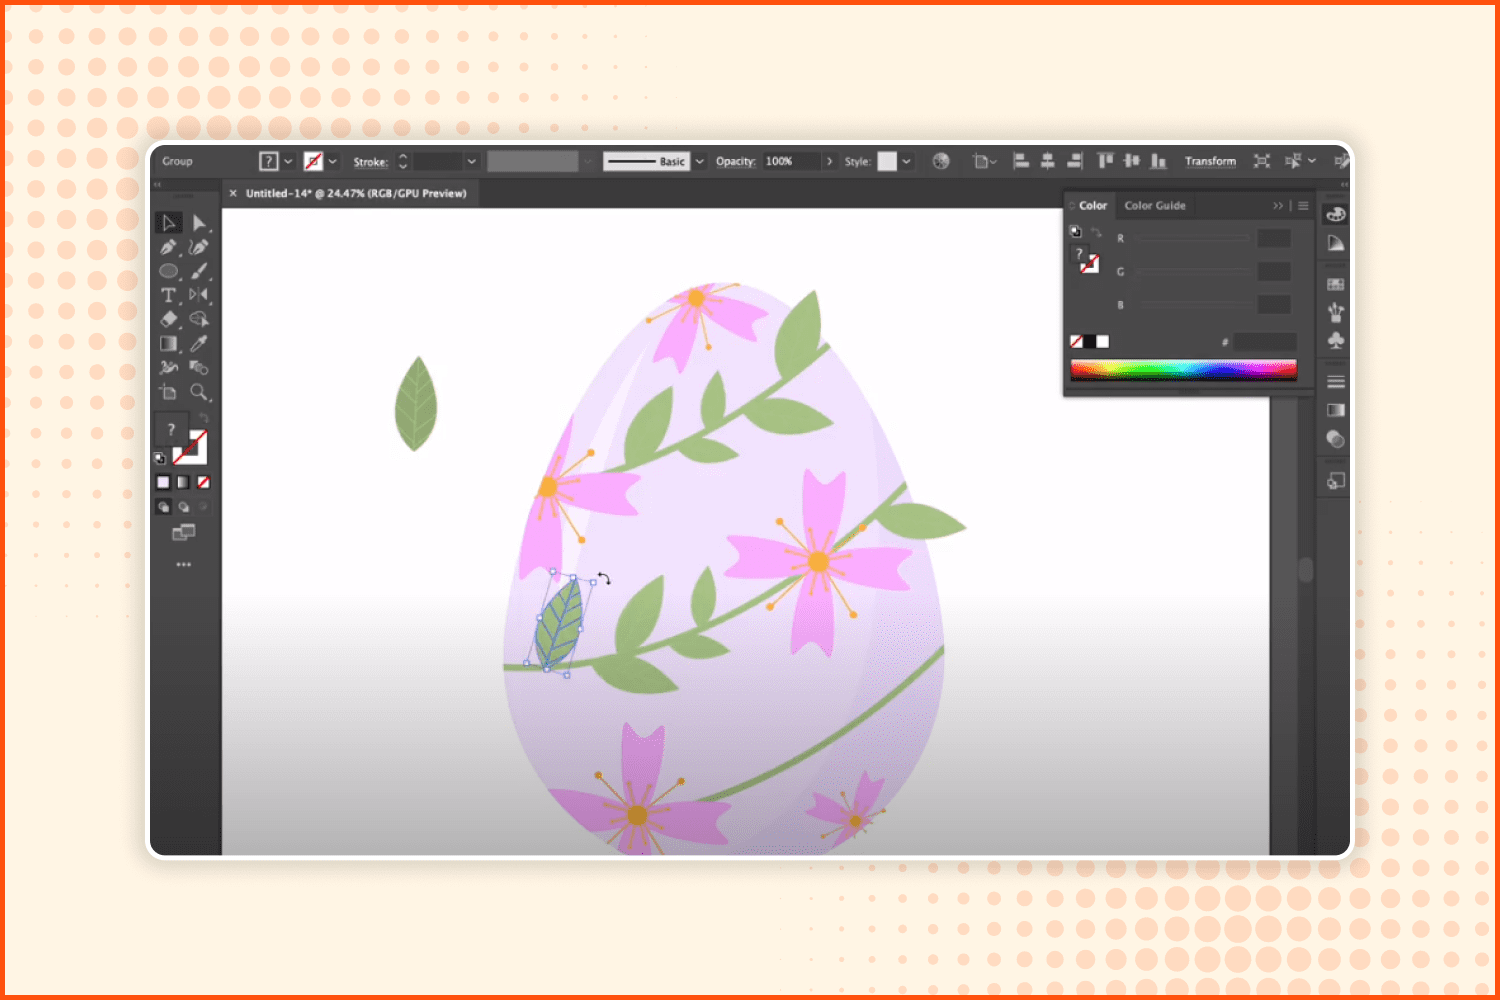 Put the leaf on the egg and make several copies of it.